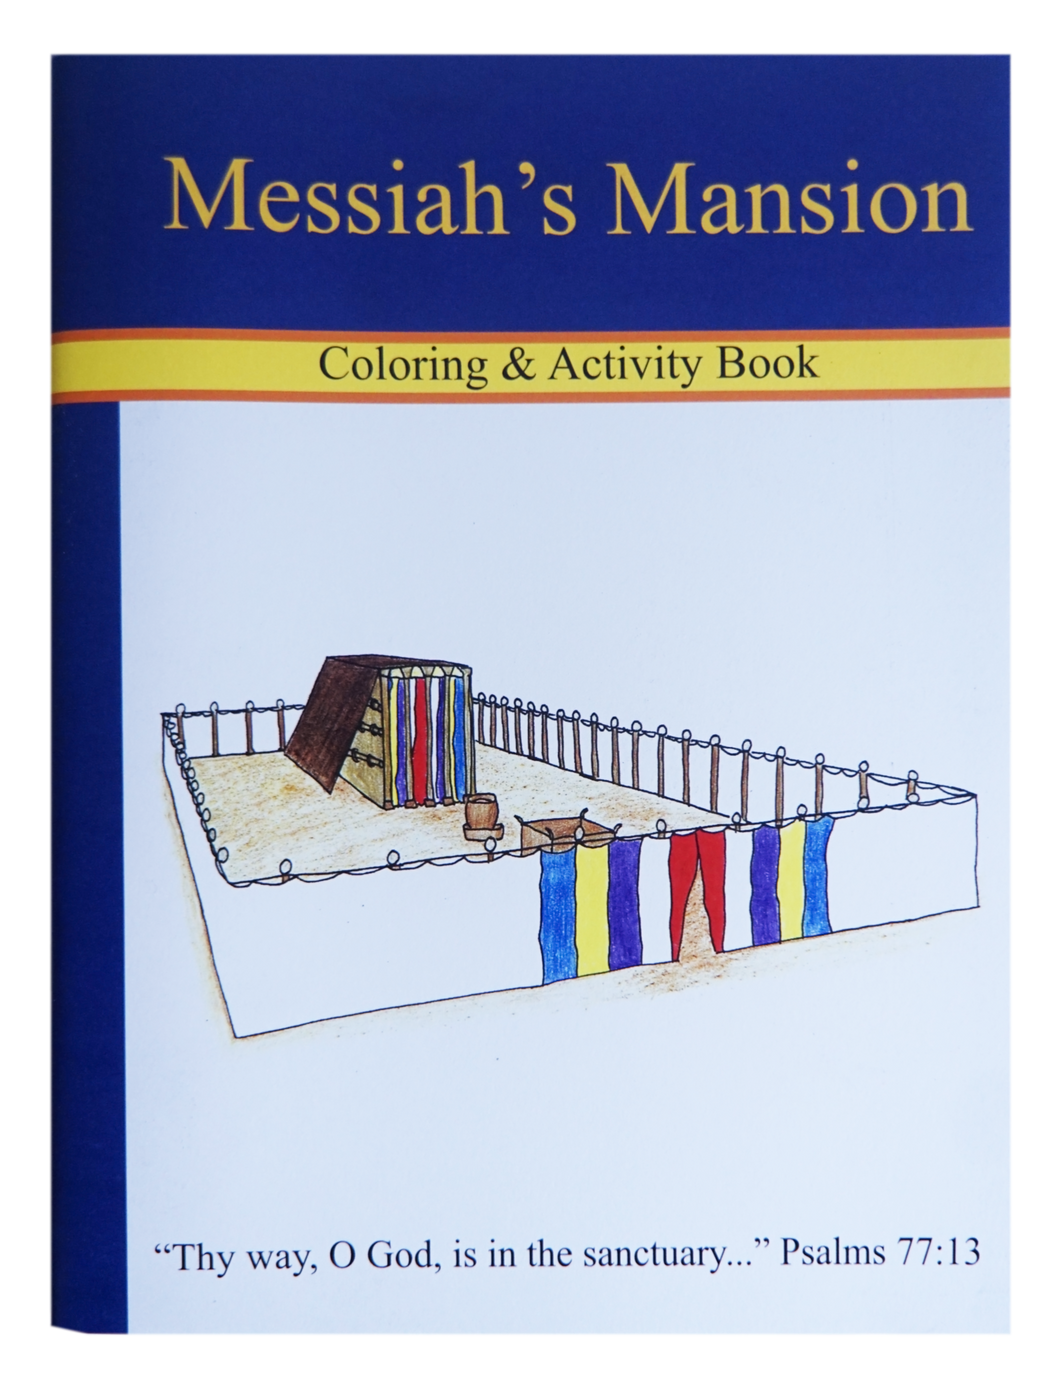 Messiah's Mansion Coloring & Activity Book